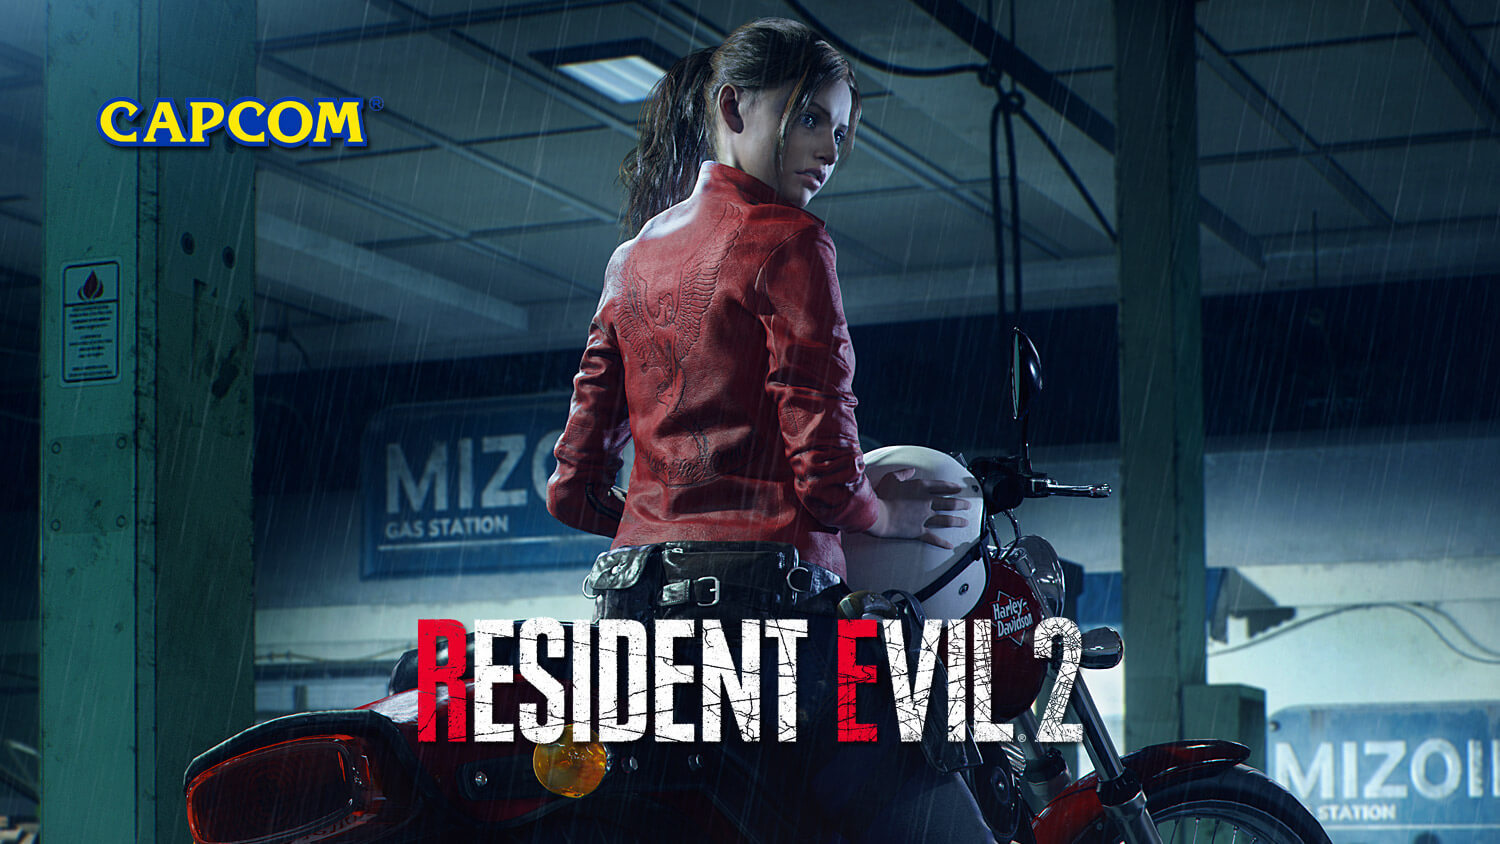 Resident-Evil-2-Remake-Reveals-Claire-Redfield-Images.jpg